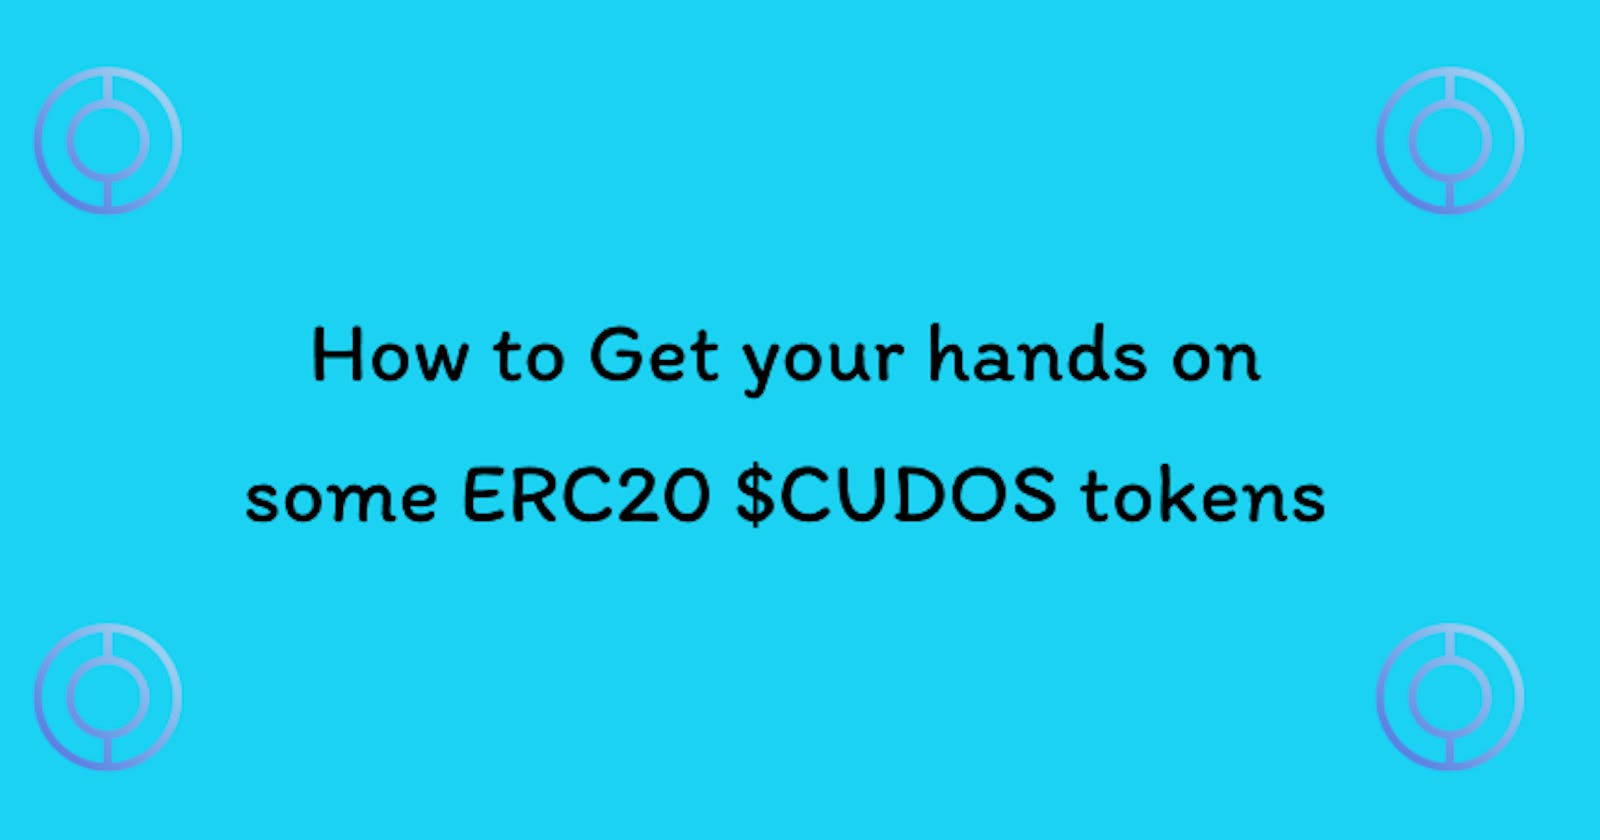 How to Get your hands on some ERC20 $CUDOS tokens